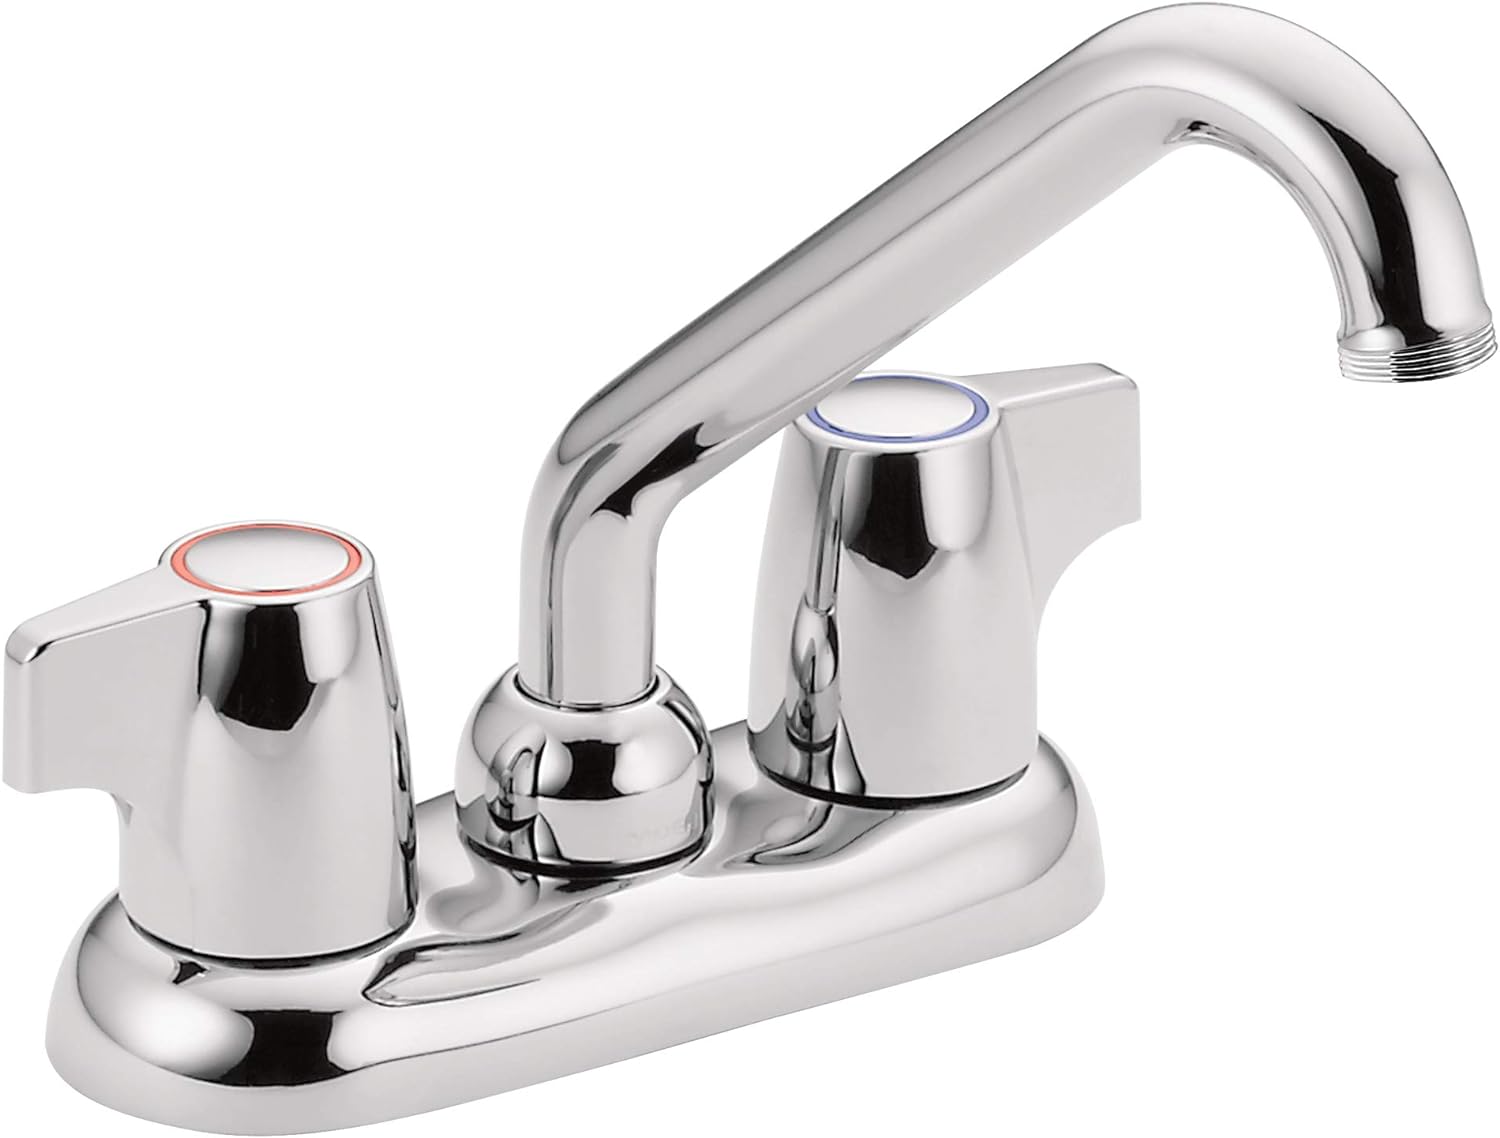 Easy to install, great quality faucet. Great price very well made.